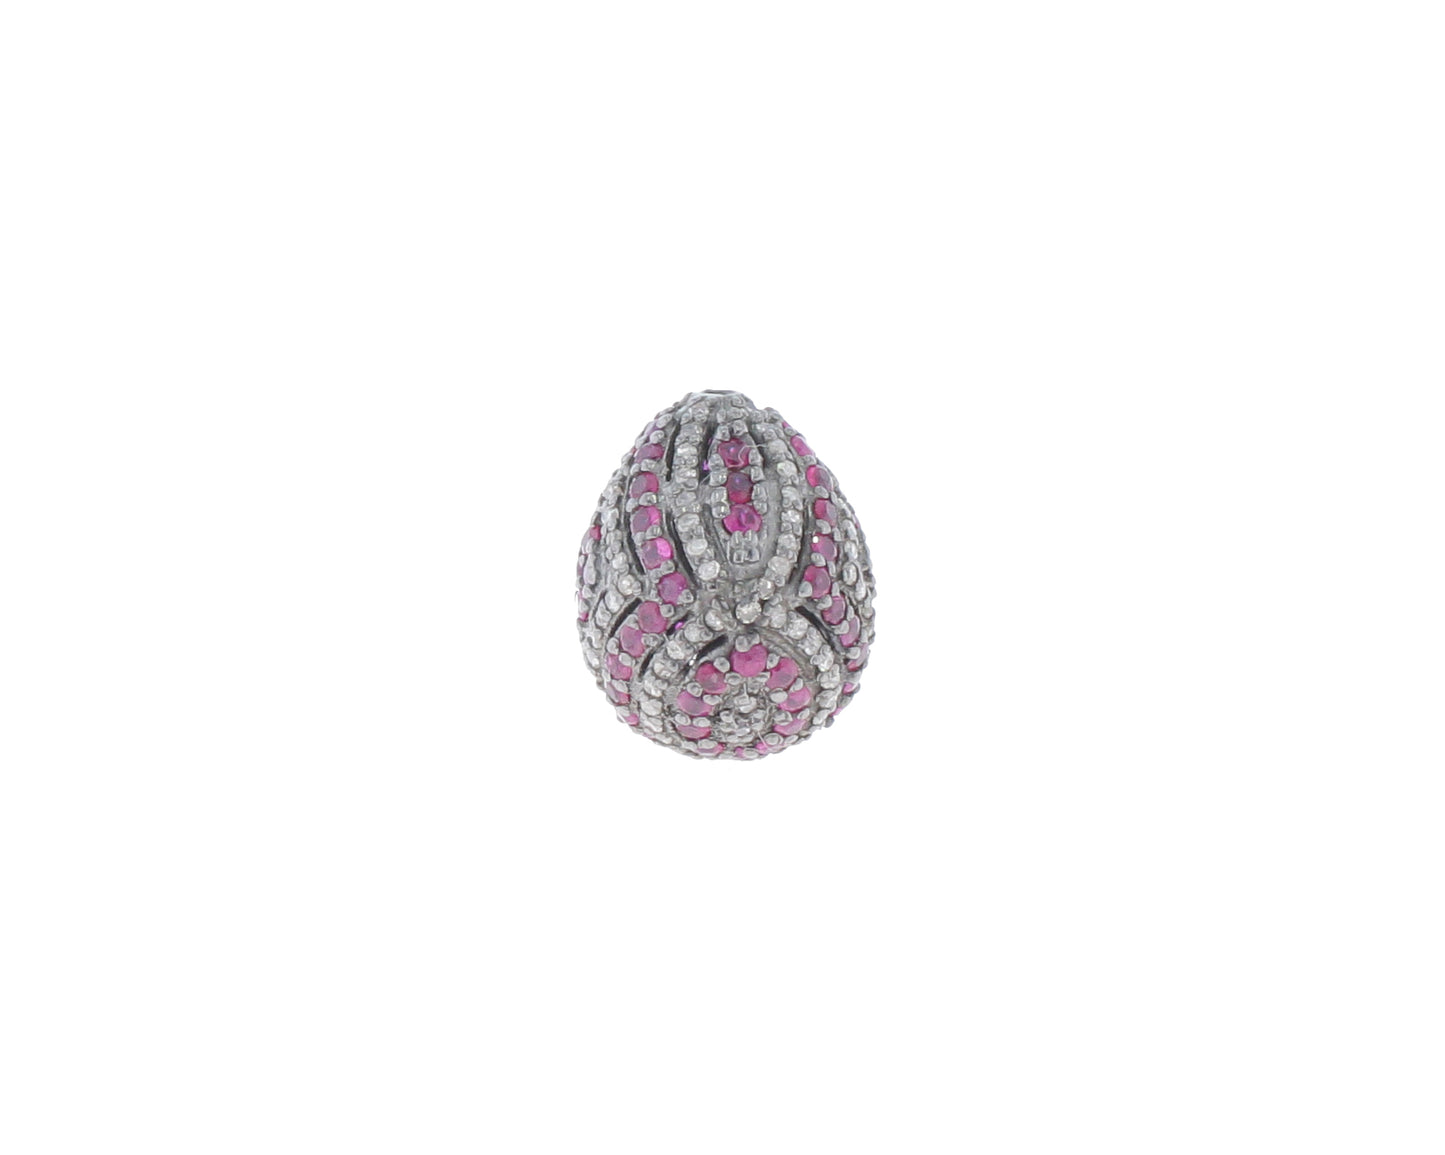 Drop Designer Silver Pave Diamond and Ruby Beads